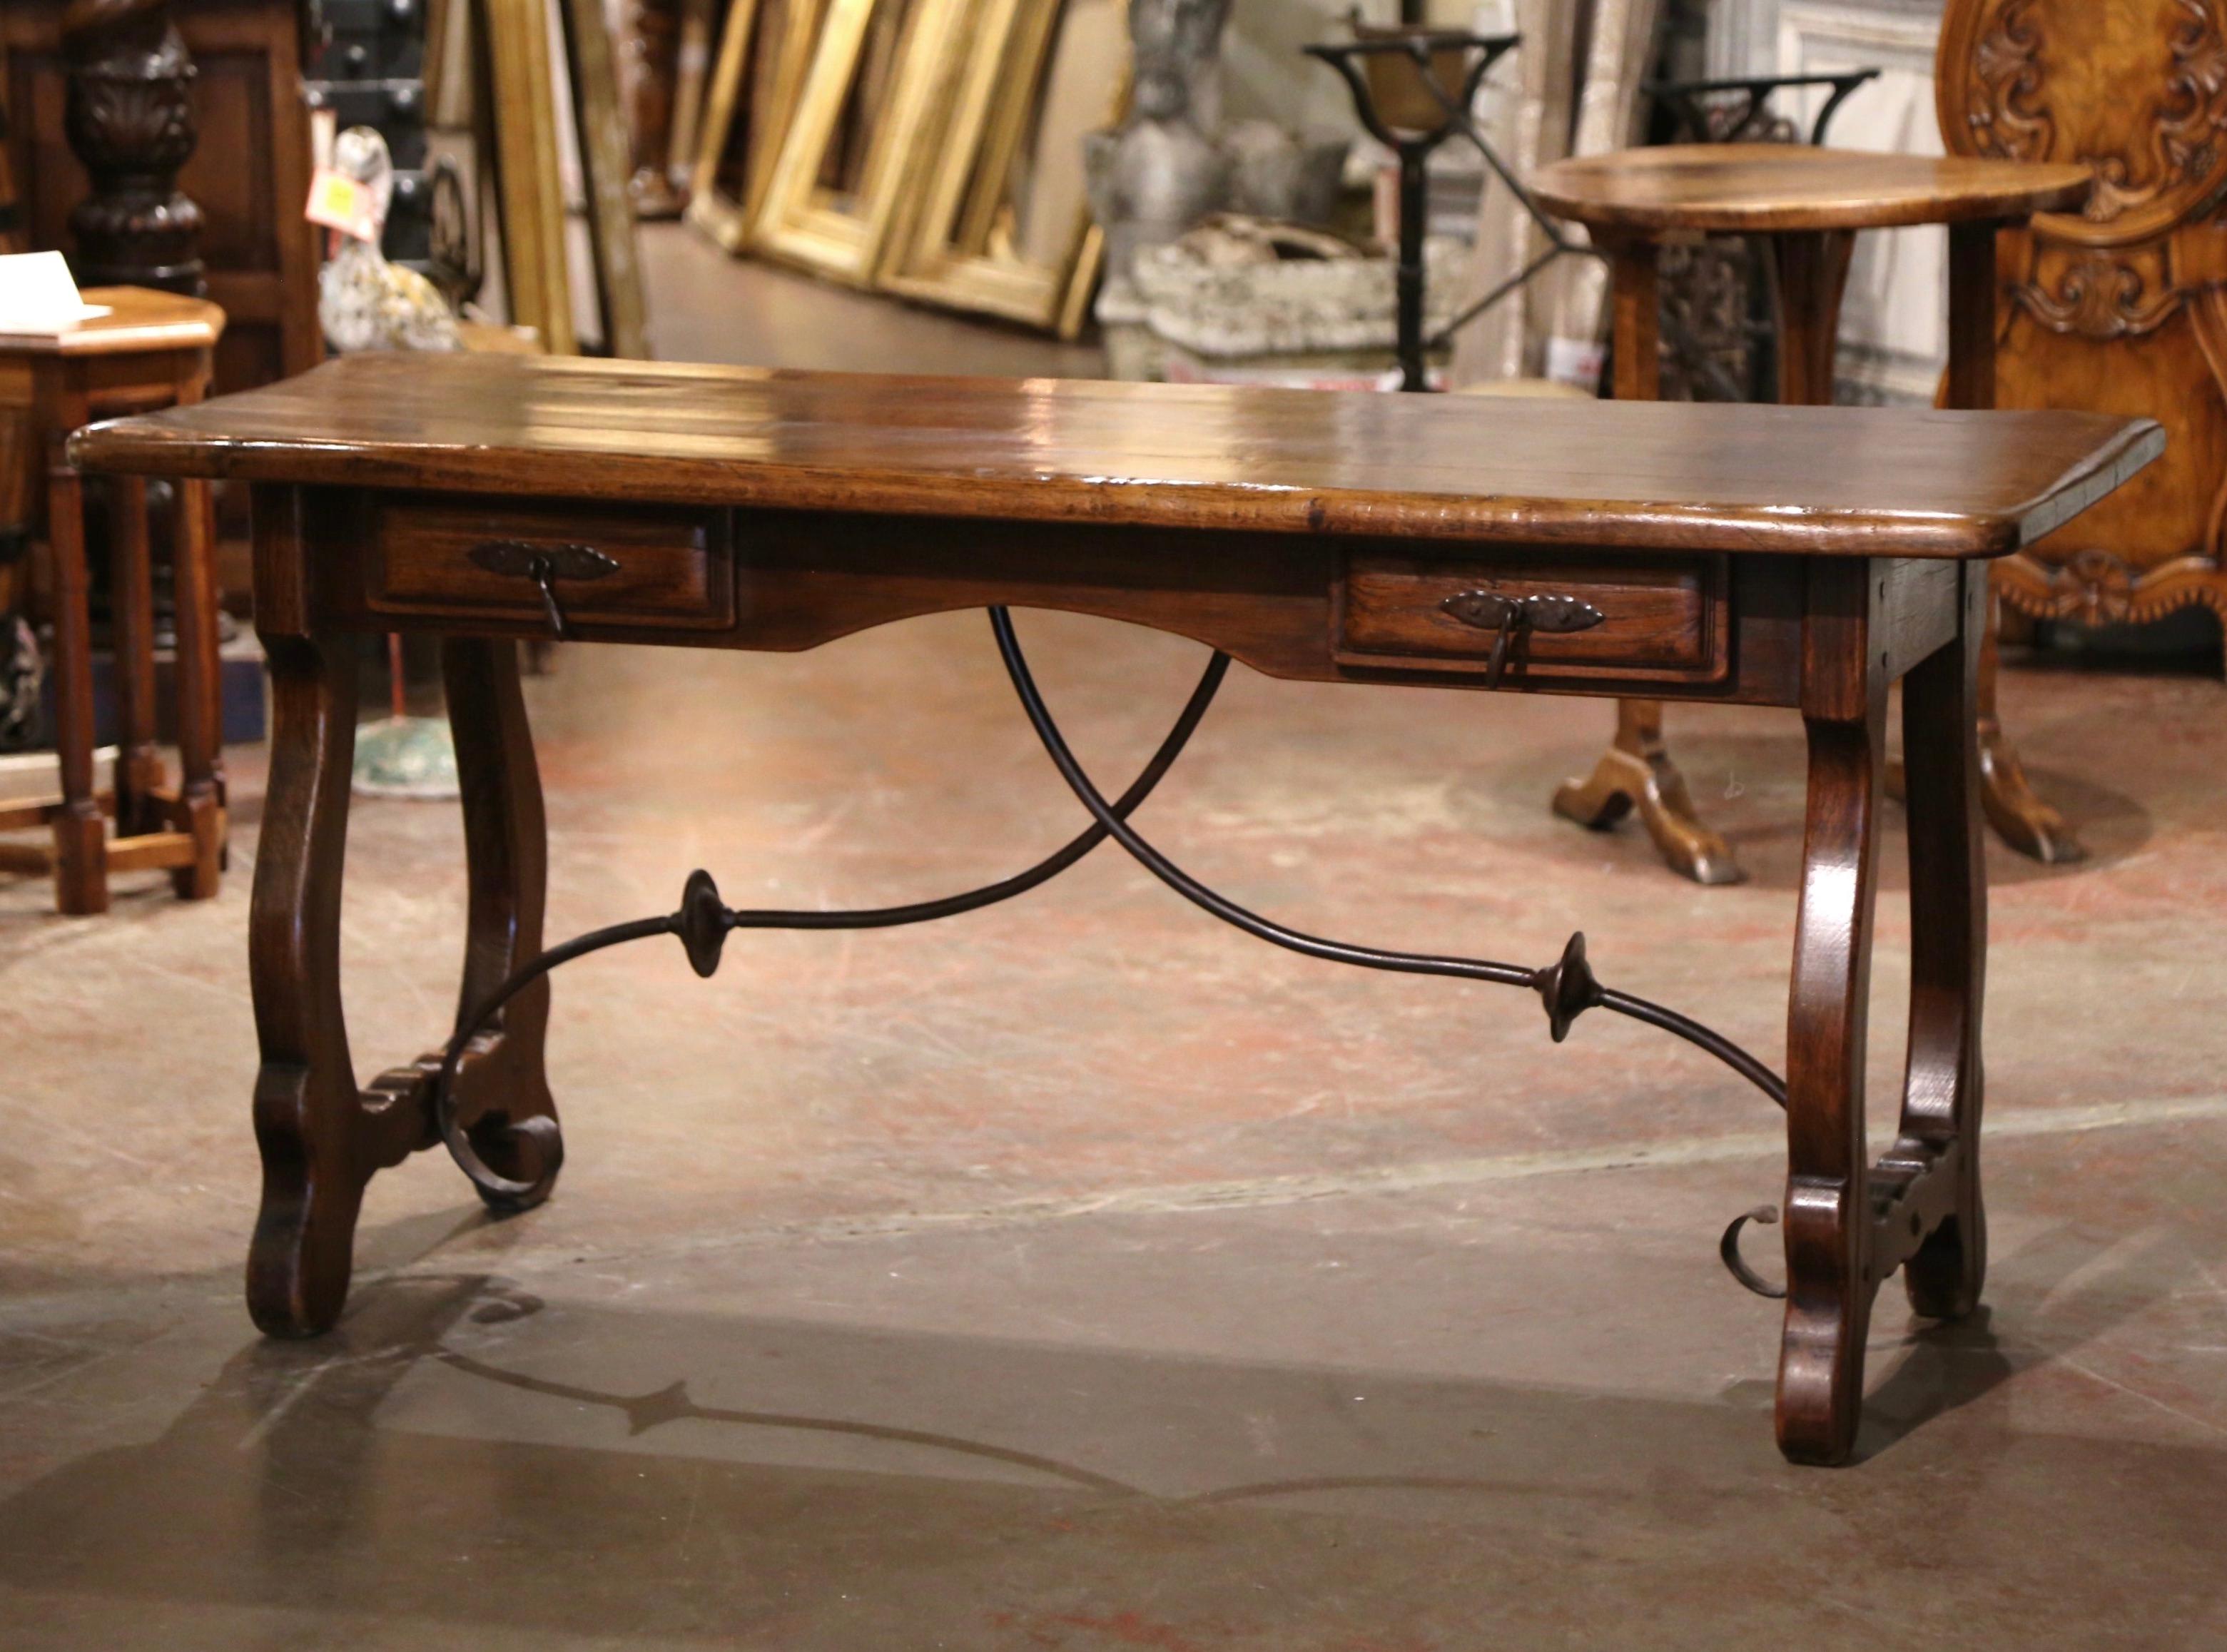 Add an elegant focal point to your study or library with this antique table desk. Carved in Spain circa 1920, the trestle table stands on two intricate curved legs connected with a thick forged wrought iron stretcher. The 6 foot desk features two